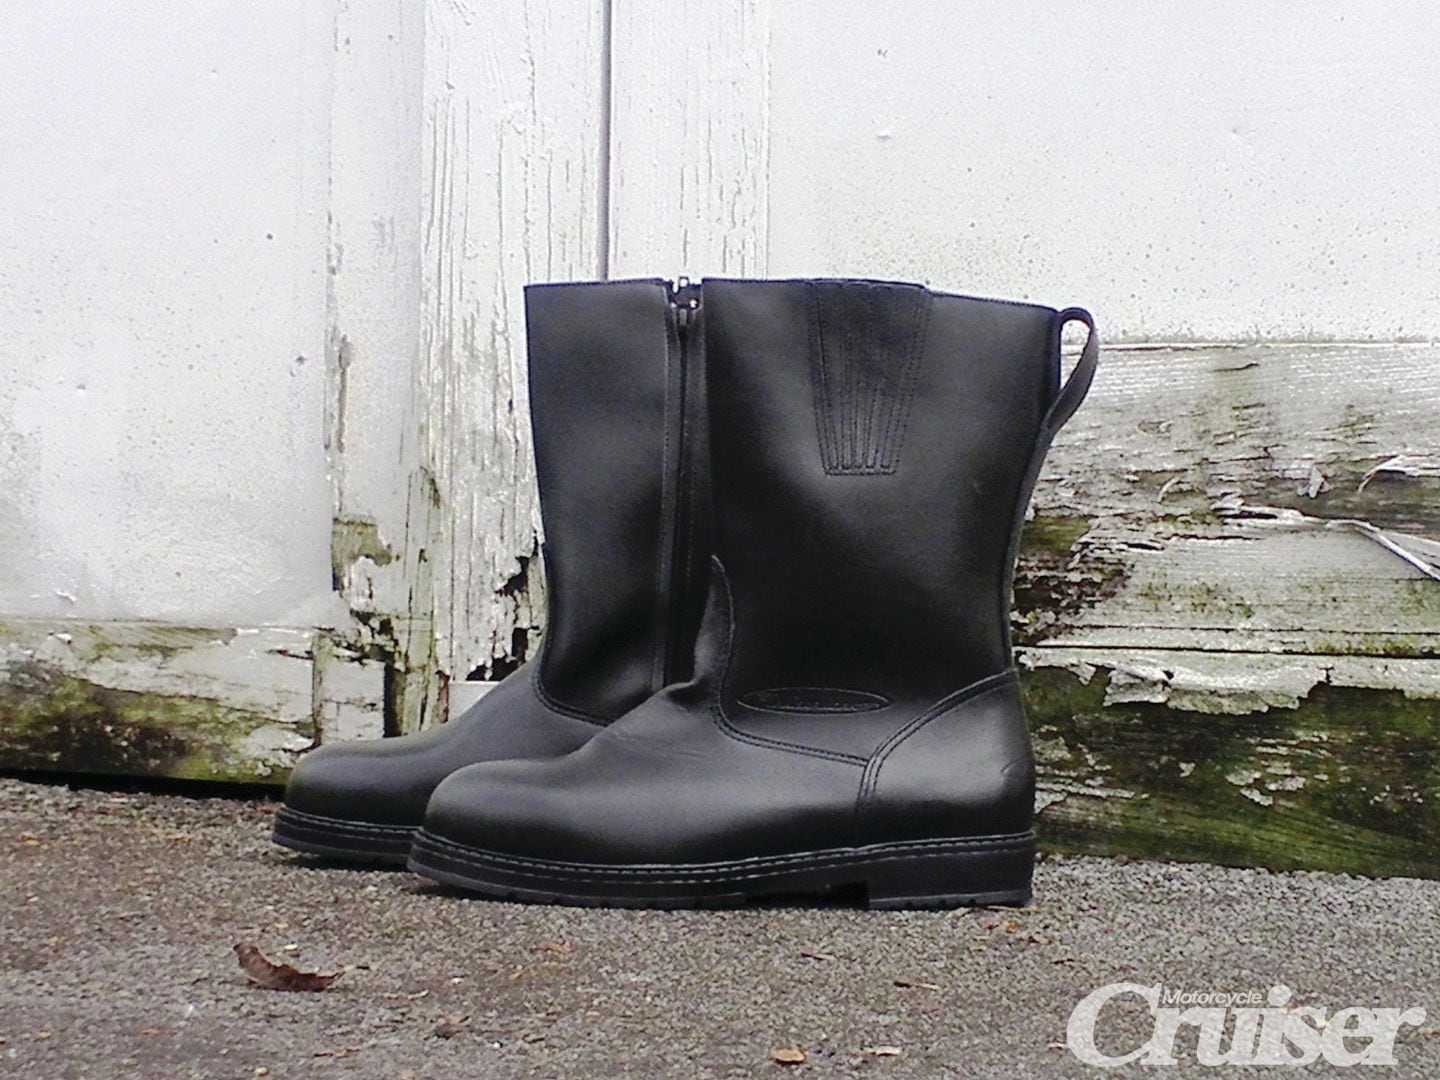 CR Tested | Cruiserworks Tour Boots | Motorcycle Cruiser